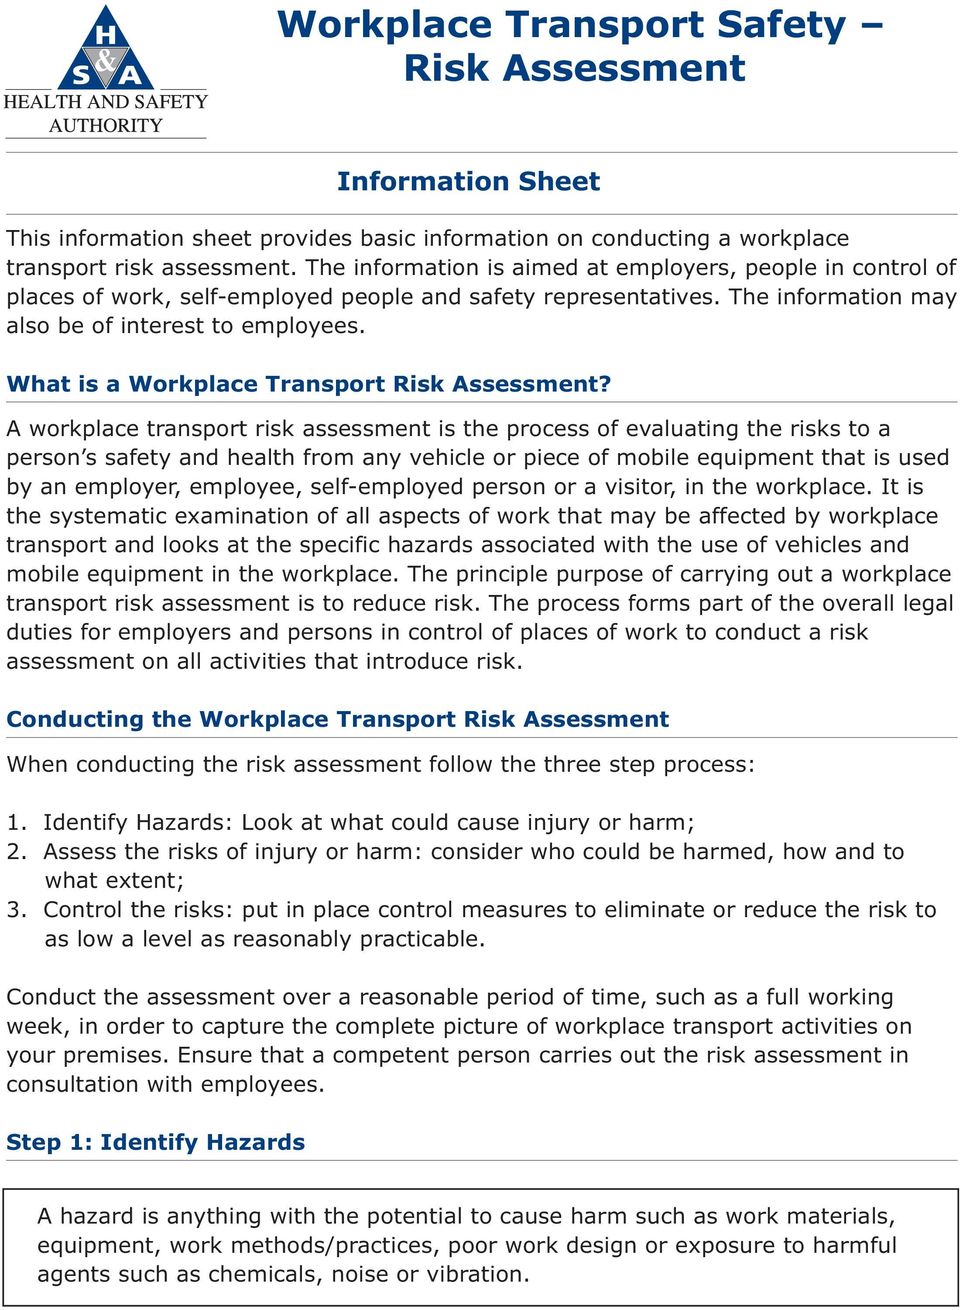 What is a Workplace Transport Risk Assessment?